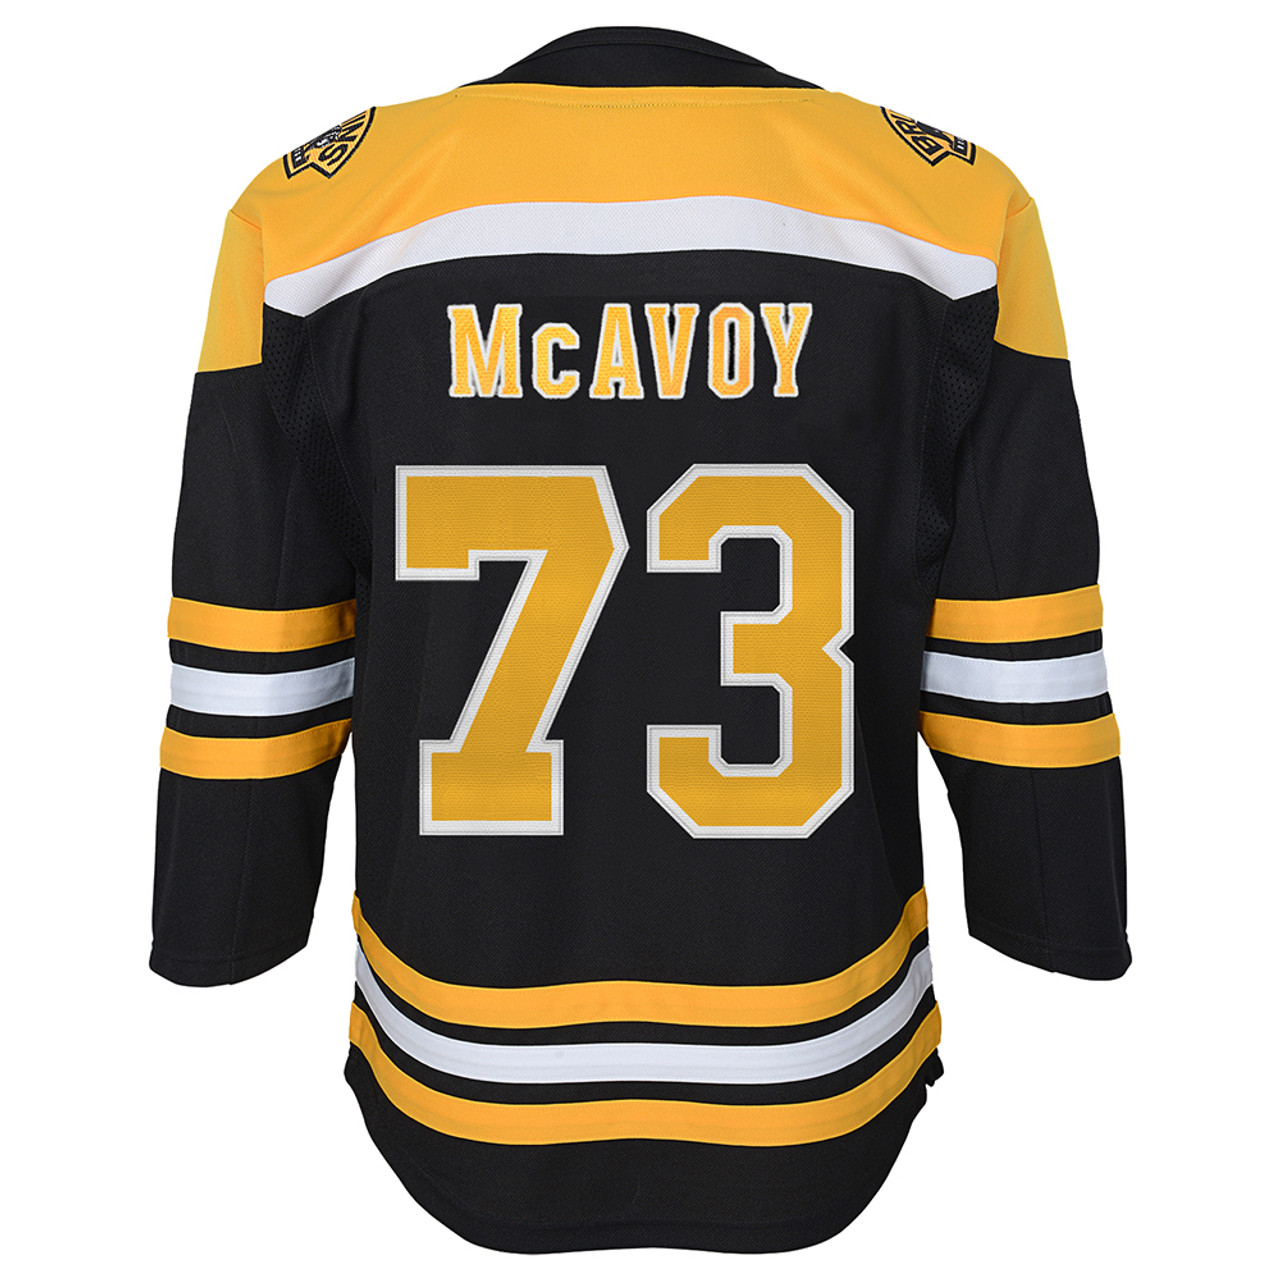 Bruins Youth Premier Home Jersey